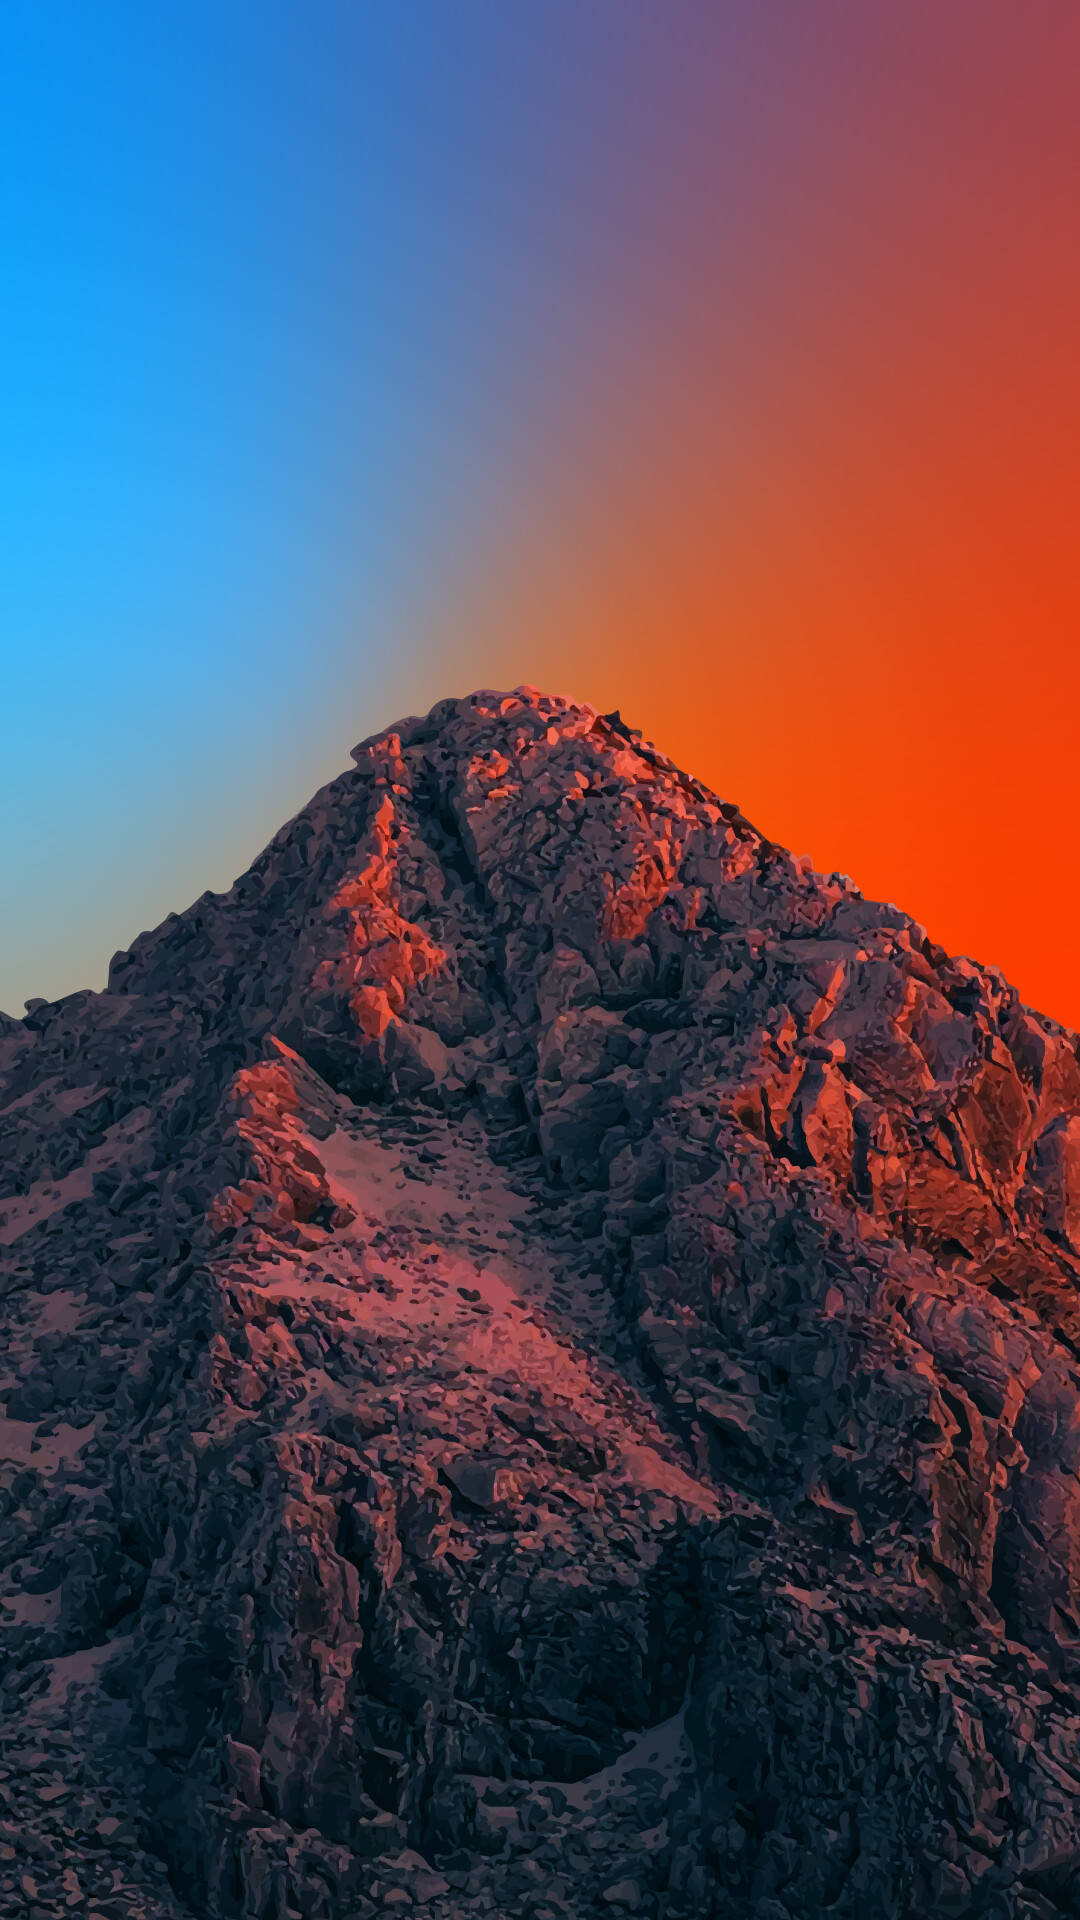 Mountain Against Colorful Sky Iphone 2021 Wallpaper